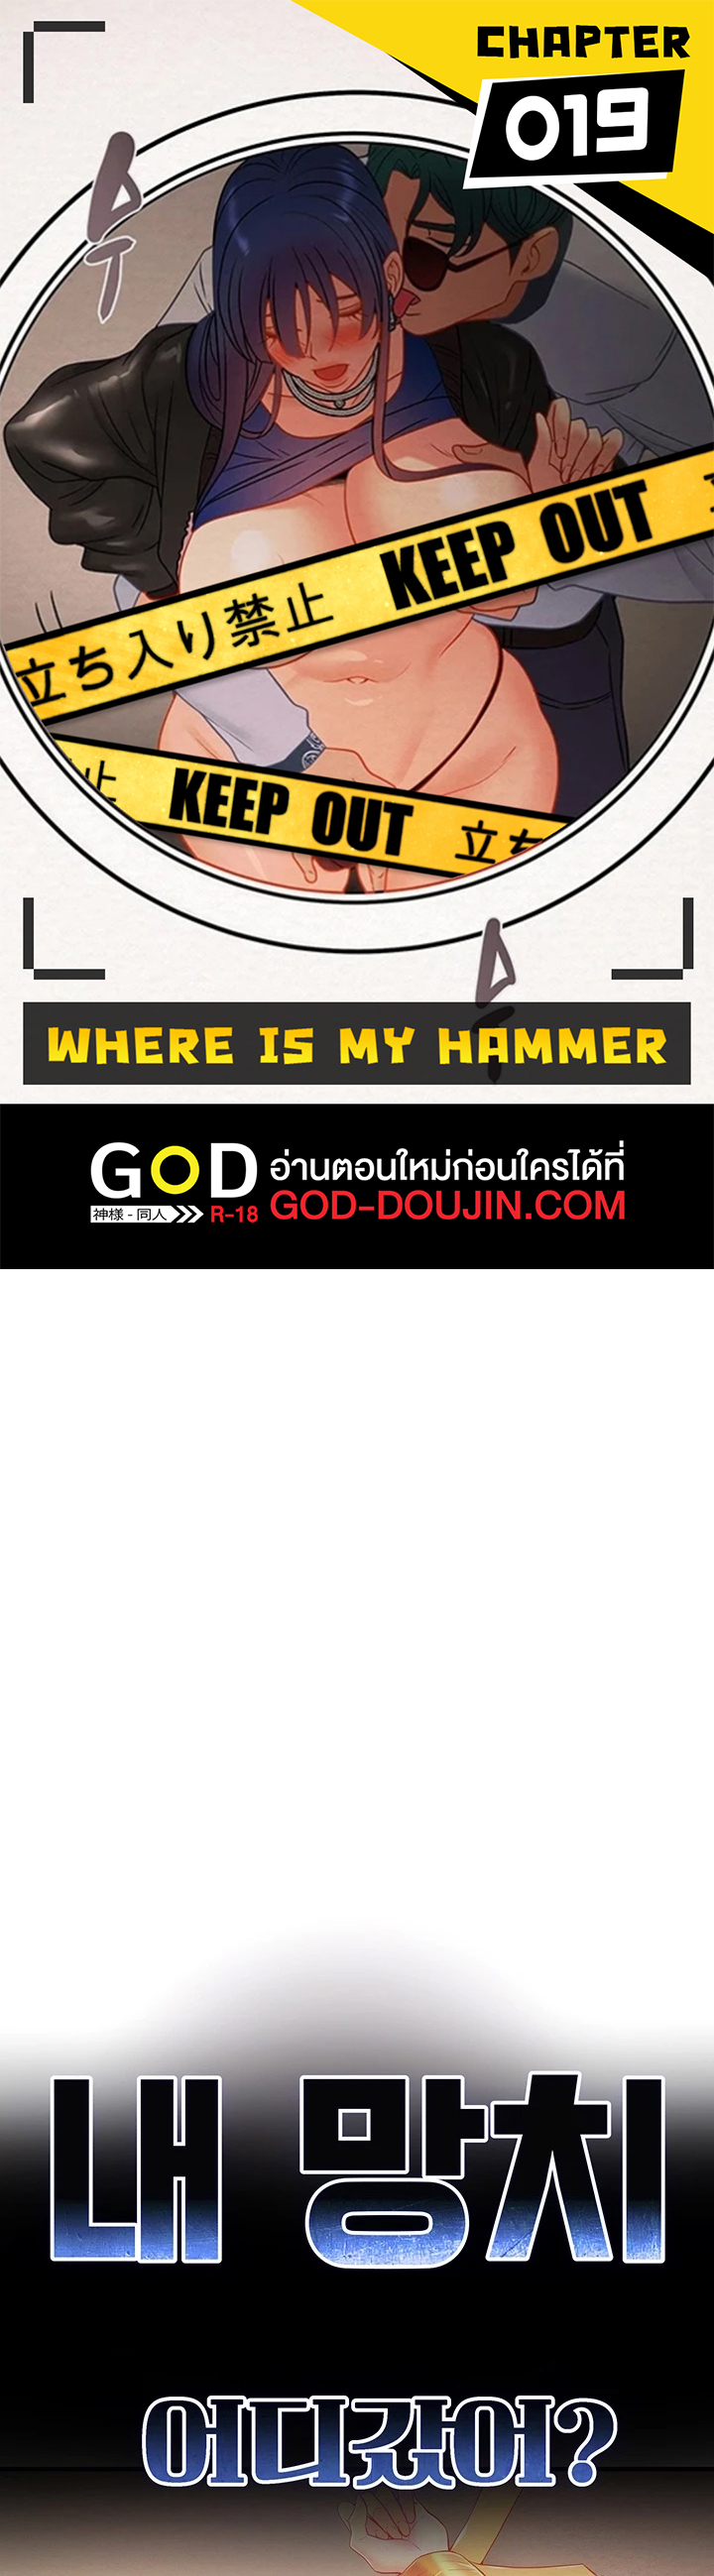 Where is My Hammer01